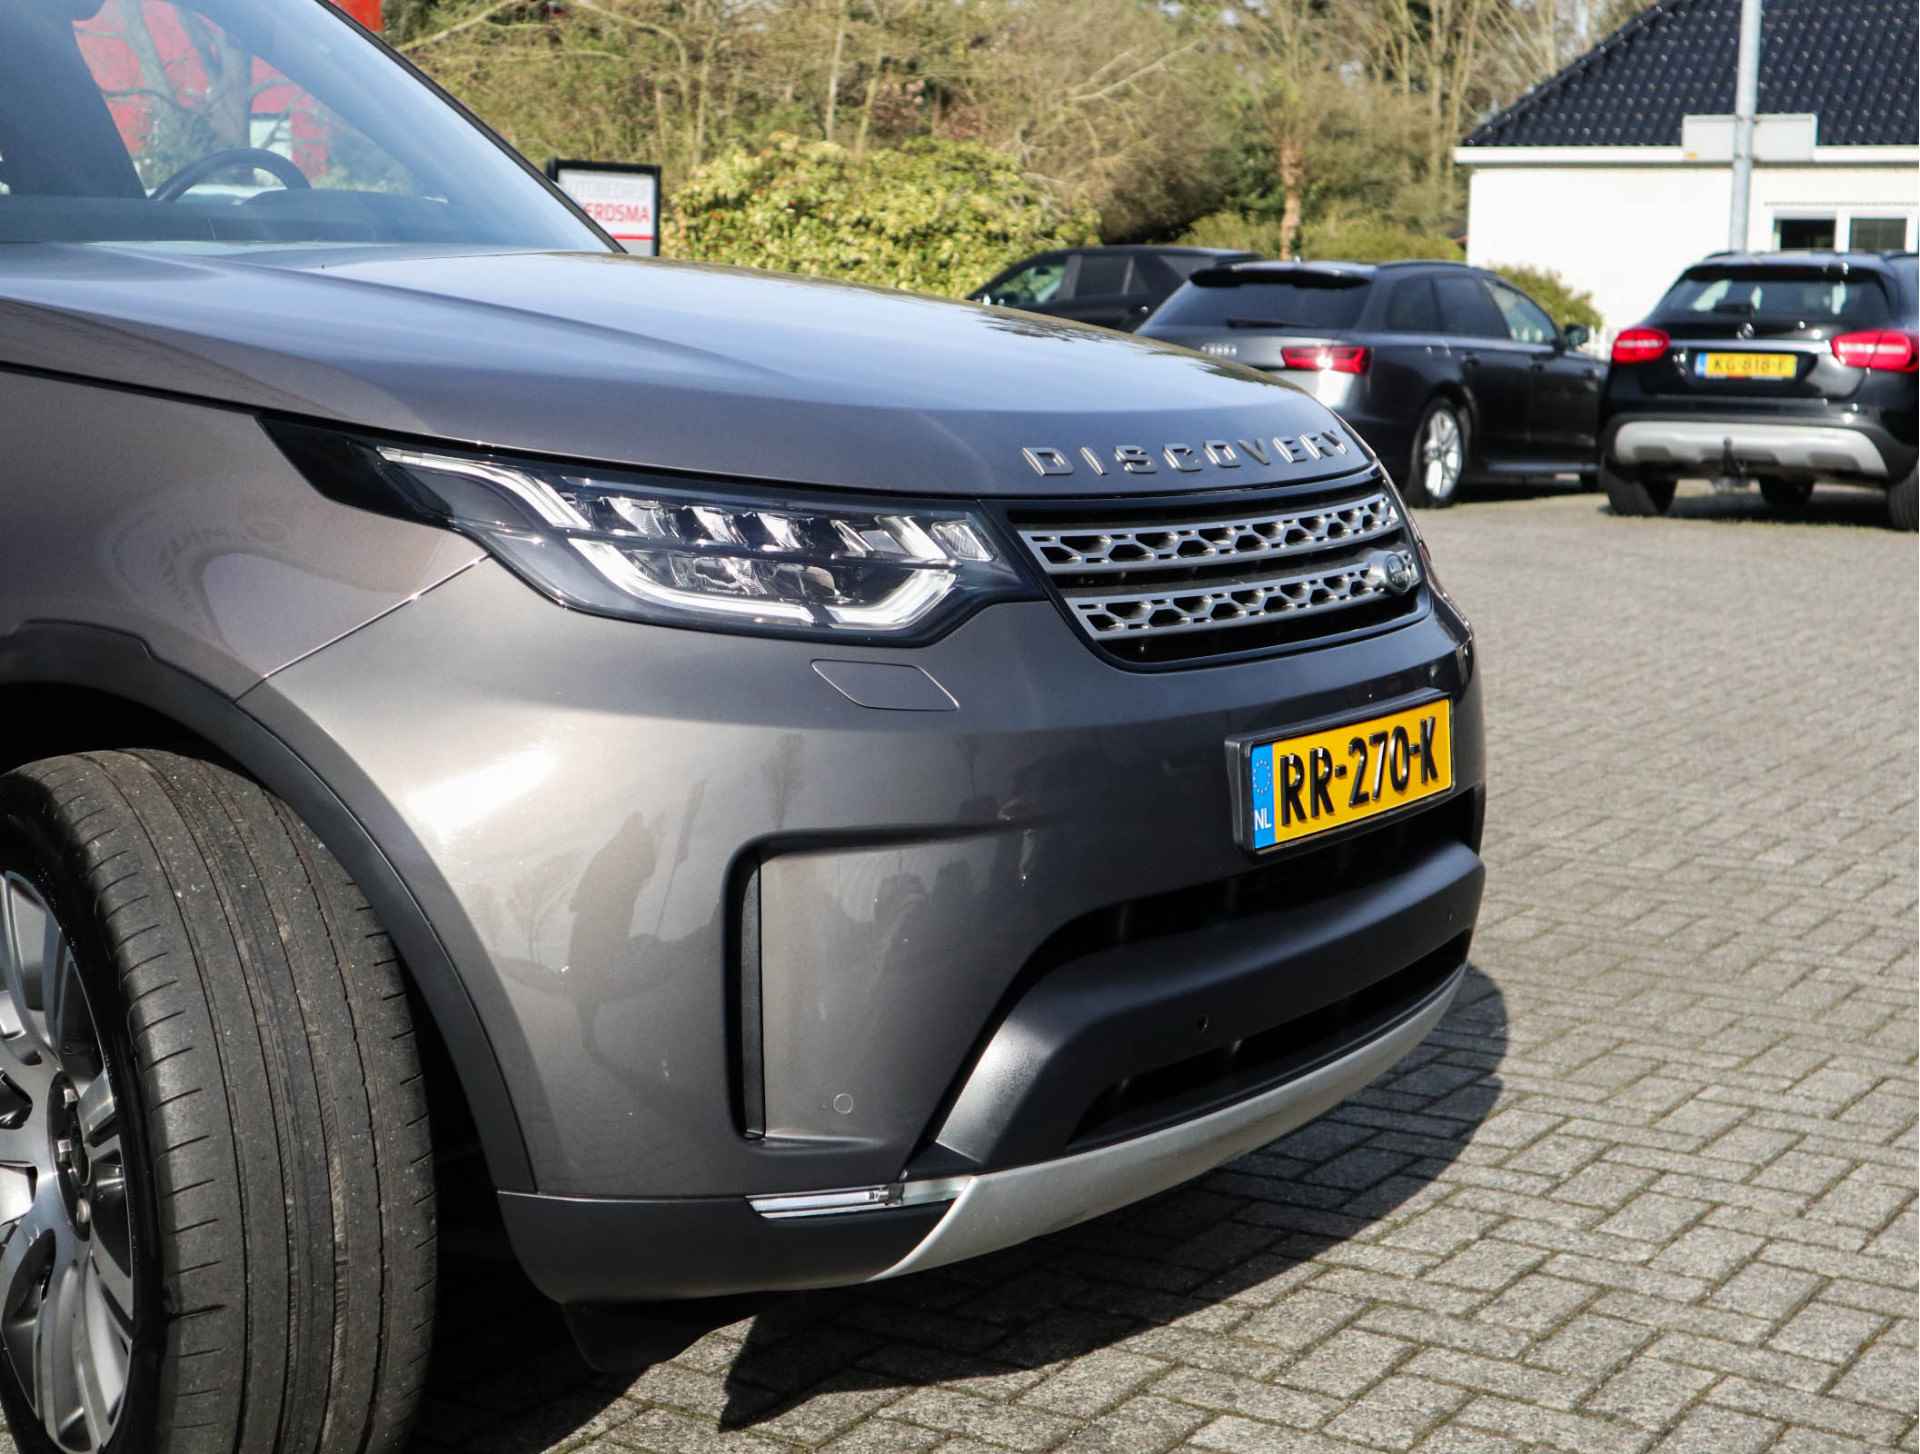 Land Rover Discovery 2.0 Sd4 HSE Luxury 7p. Navi/Clima/Leder/Panodak/7-Persoons/Luchtvering/Trekhaak - 6/34